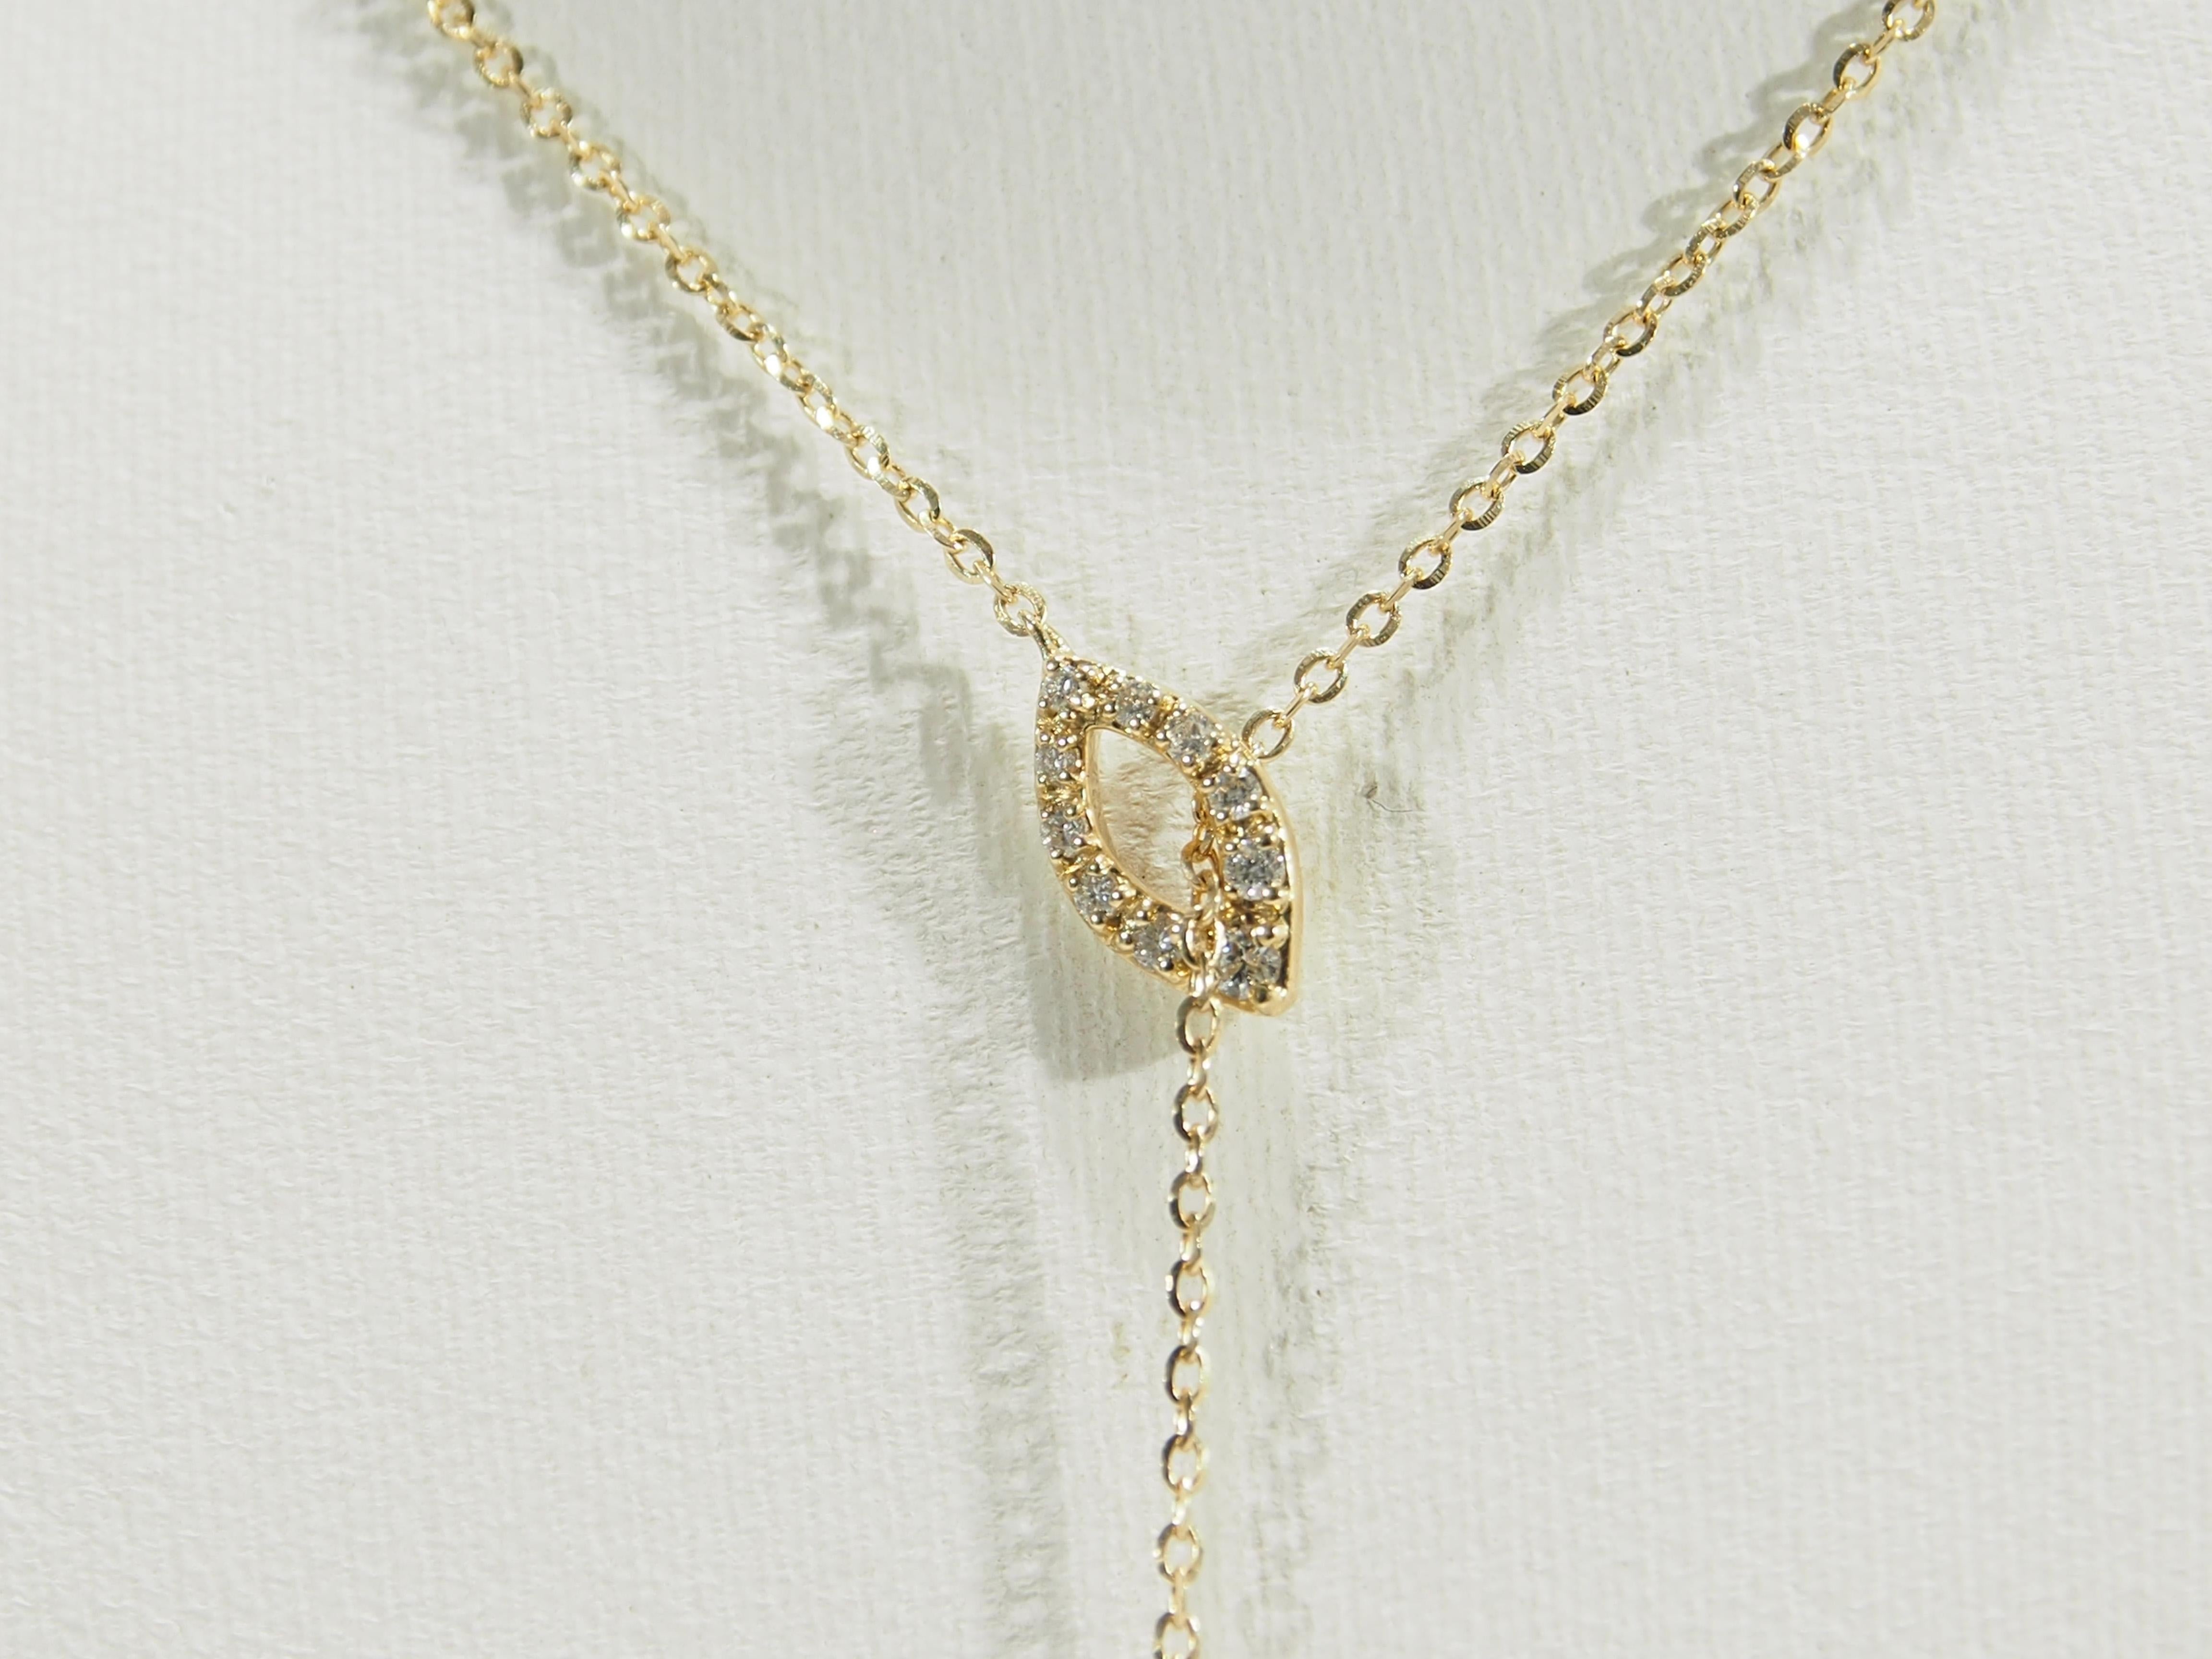 A delicate 18K yellow gold 'Y' Necklace with 2 geometric shapes set with (28) Round Brilliant Cut Diamonds G-H in color, VS-SI in clarity and approximately .41 carat total weight. The necklace is 17 1/2 inches in length with a 1 3/4 inch dangle